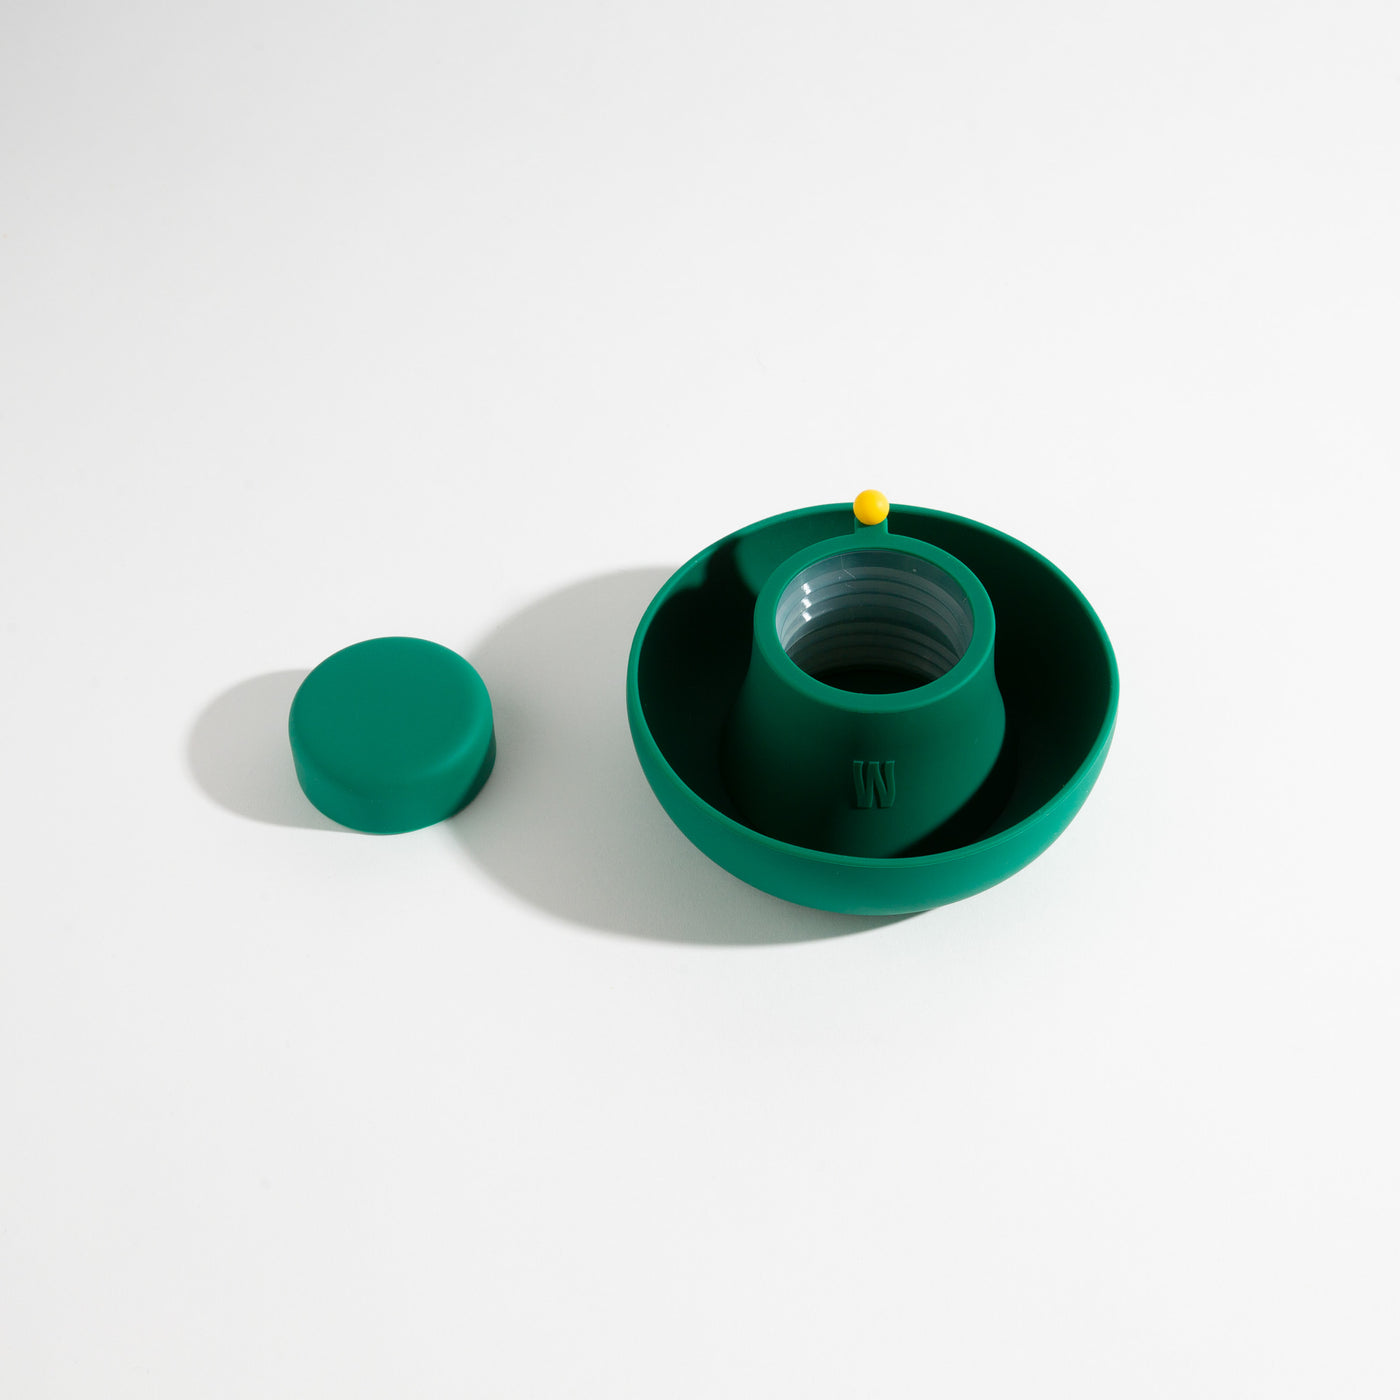 Ultra-soft, dust-resistant forest green silicone covers for glass bong protection, displayed on a table.